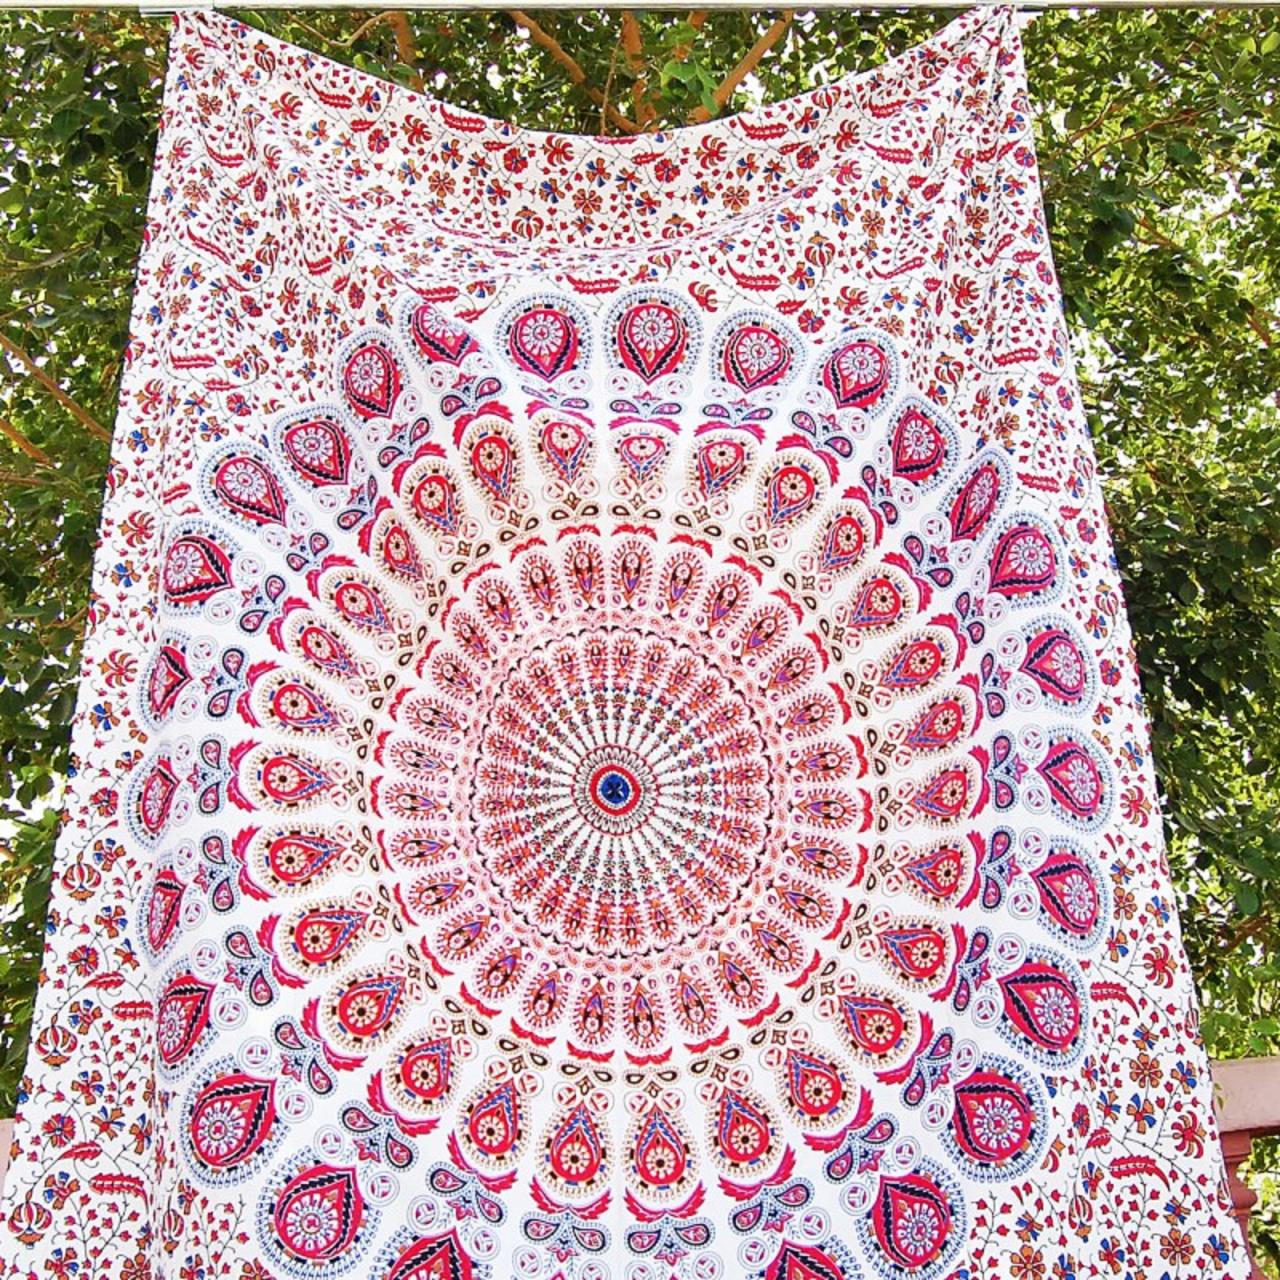 Beautiful Pink Peacock Design Mandala Hippie Tapestry Wall Hanging Bedding Bedspread Twin Ethnic Throw